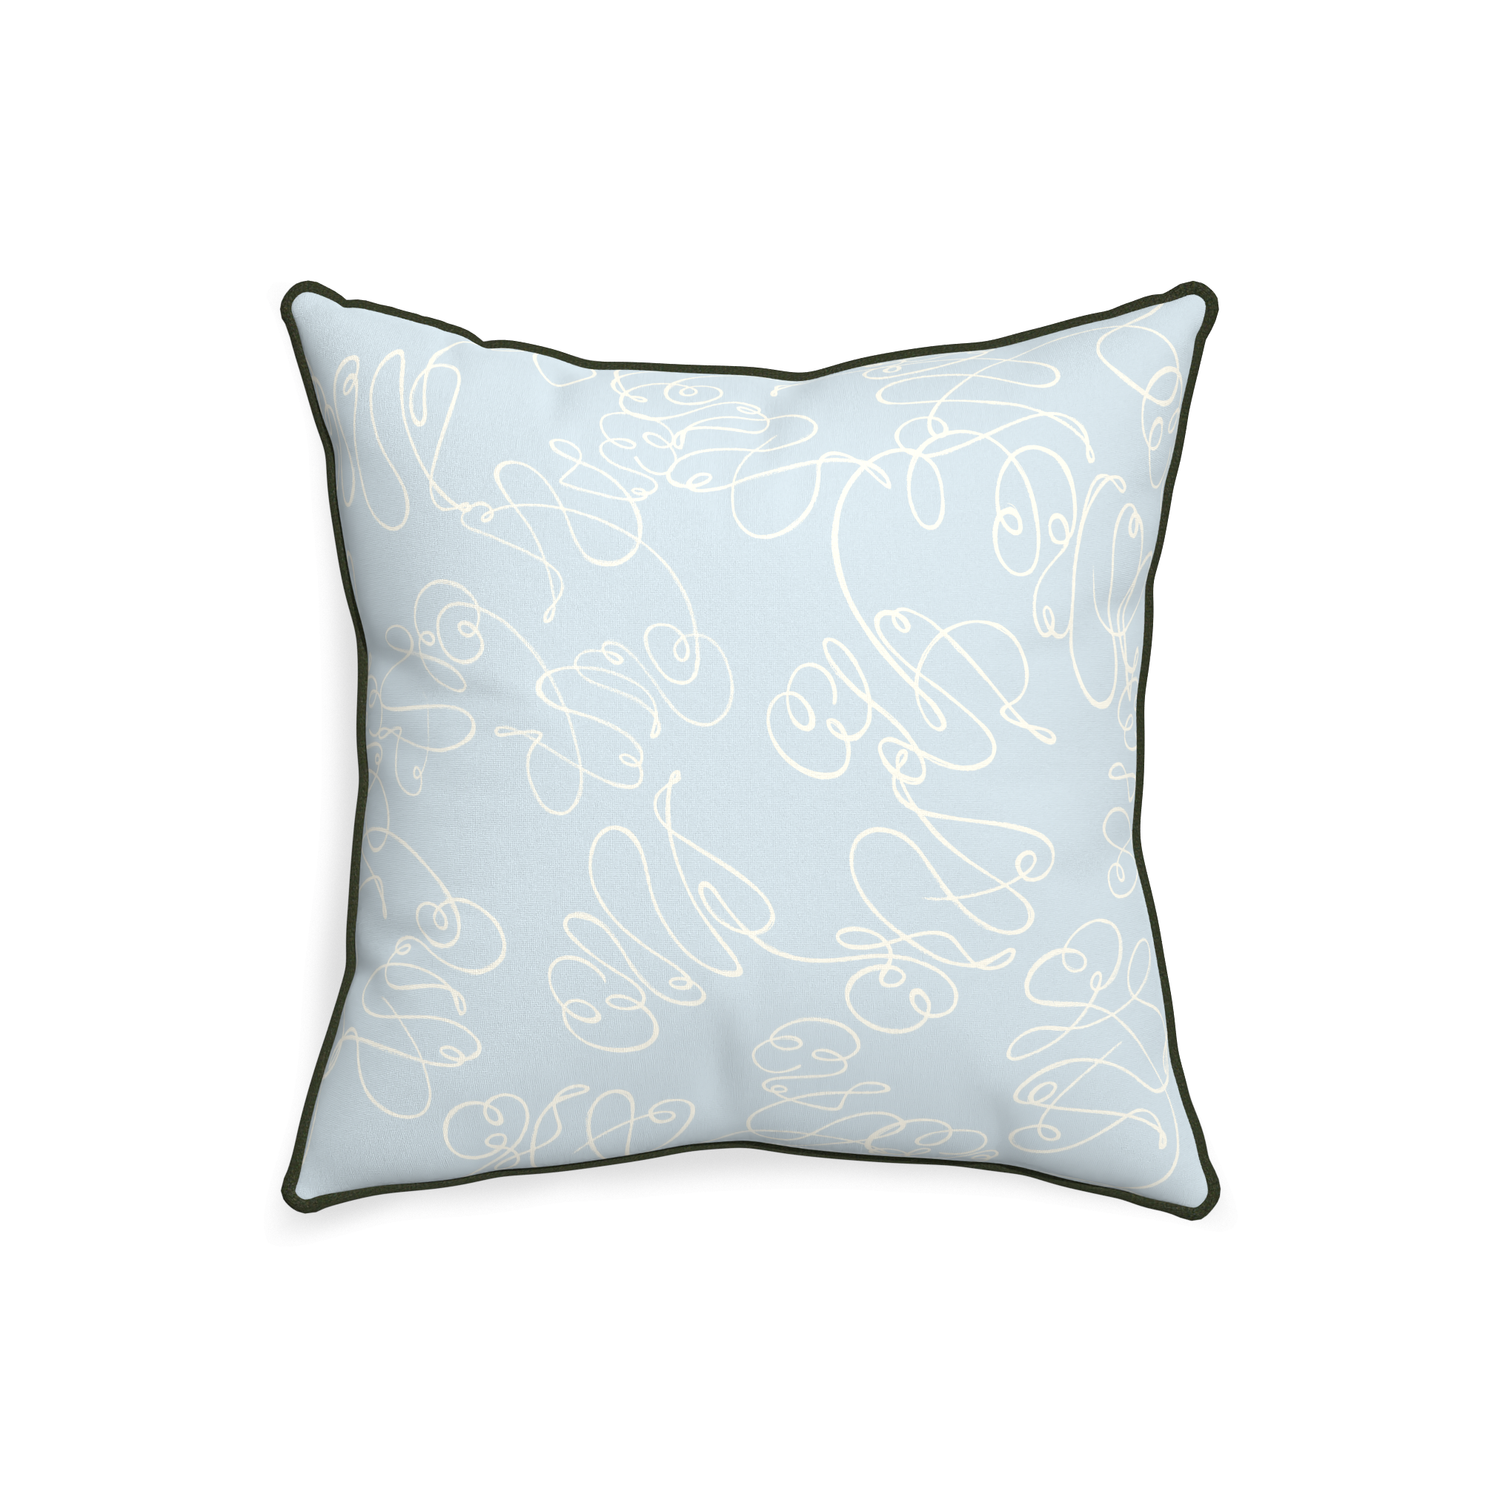 20-square mirabella custom powder blue abstractpillow with f piping on white background